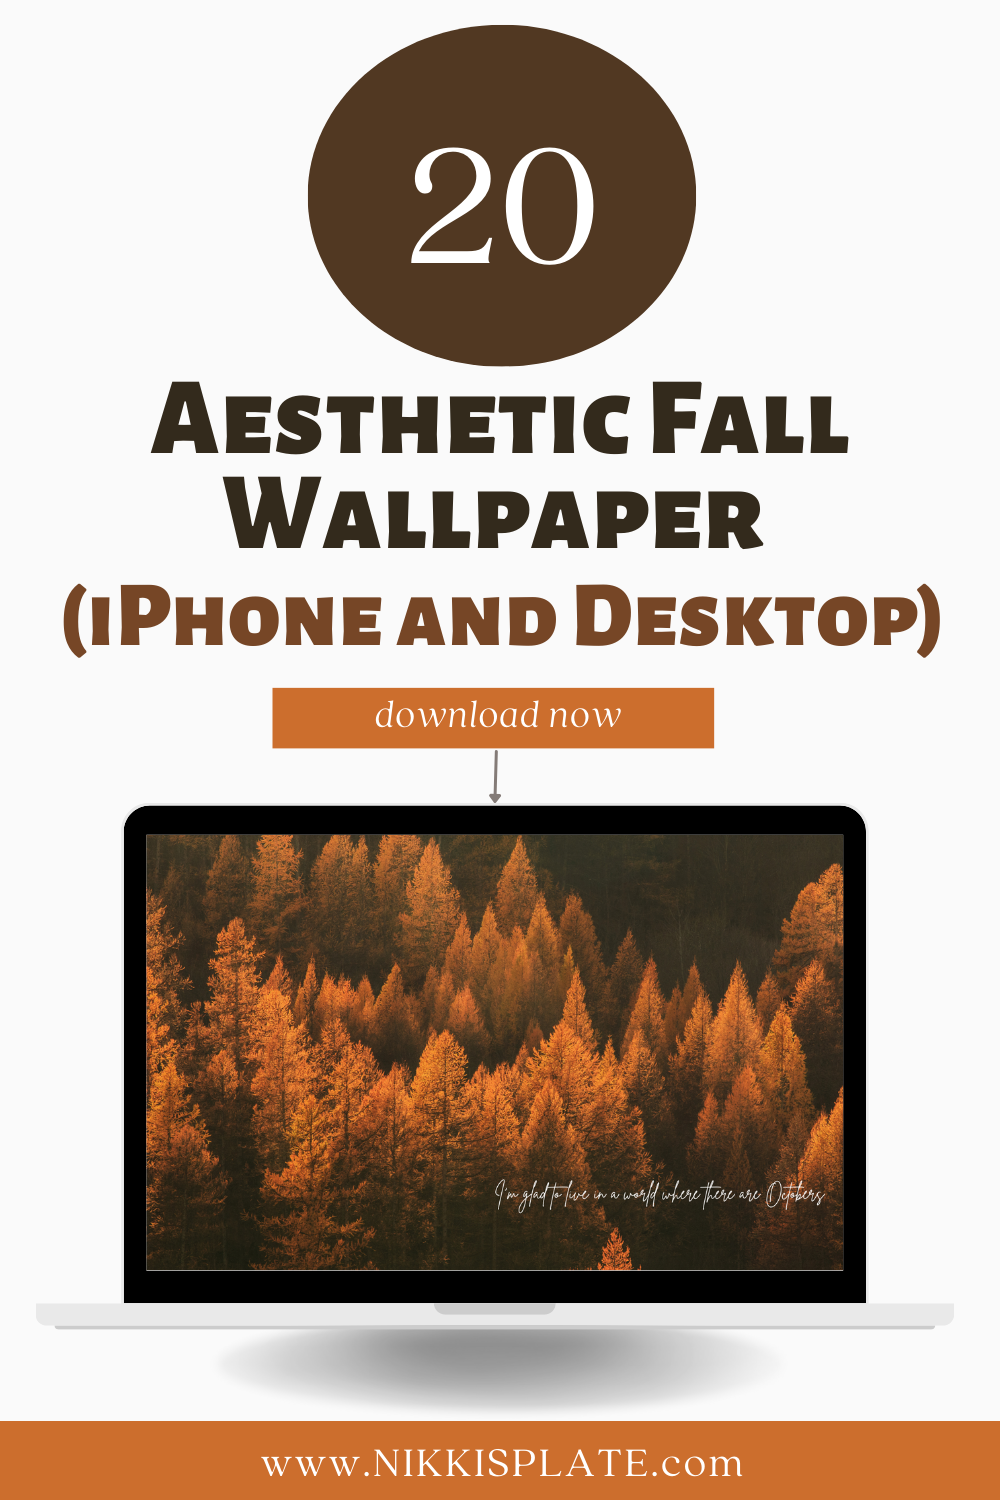 FREE Aesthetic Fall Wallpaper iPhone and Desktop; Looking for some beautiful and free fall aesthetic wallpapers for your phone and desktop? I have you covered! My collection of 20 aesthetic fall wallpapers will enhance your devices with the best autumn vibes. Download them now and add a touch of fall to your digital world!